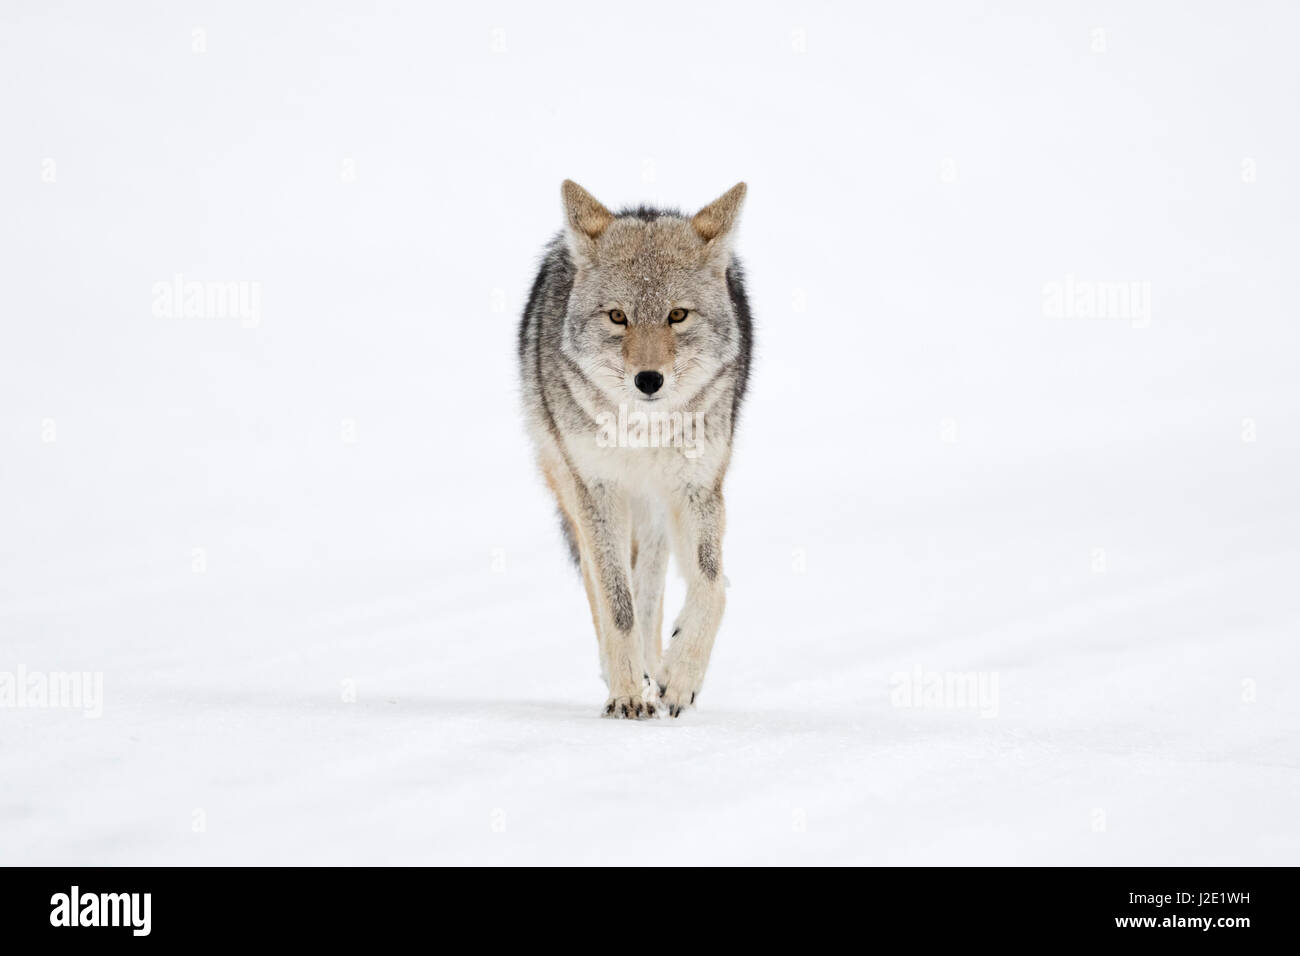 Coyote / Kojote ( Canis latrans ) in winter, walking directly towards the photographer, holding eye contact, frontal shot, Yellowstone NP, Wyoming, US Stock Photo